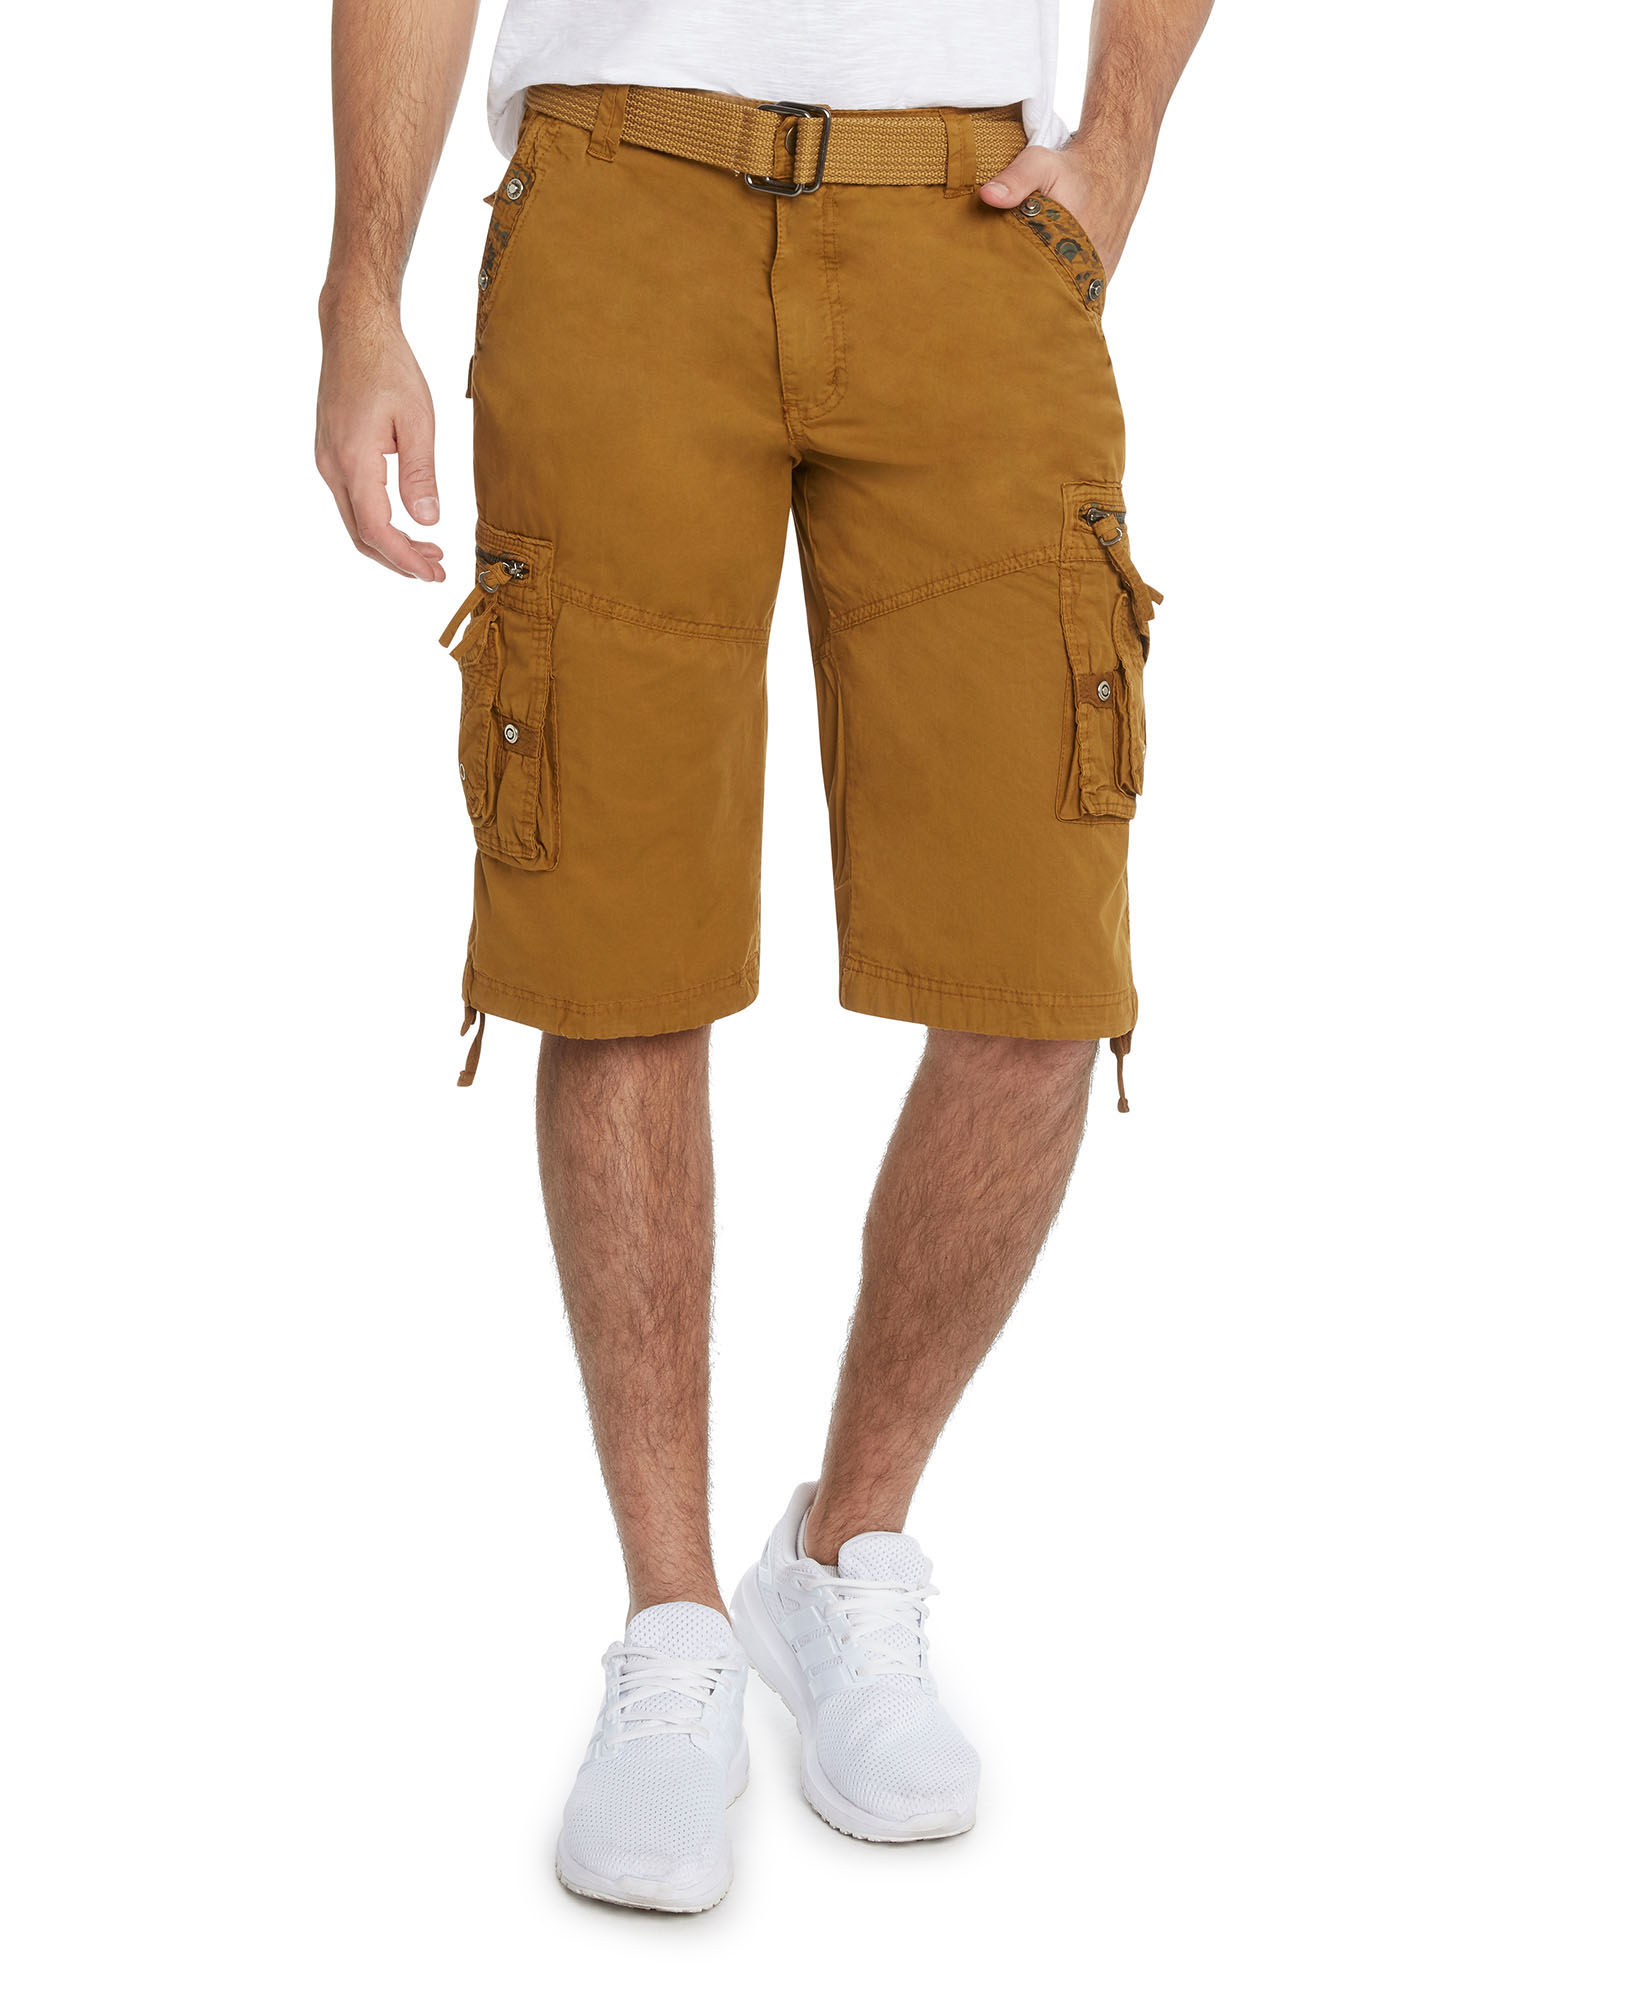 MOTOR CASUAL Men's Casual Twill Cotton Loose Fit Multi Pocket Cargo Shorts